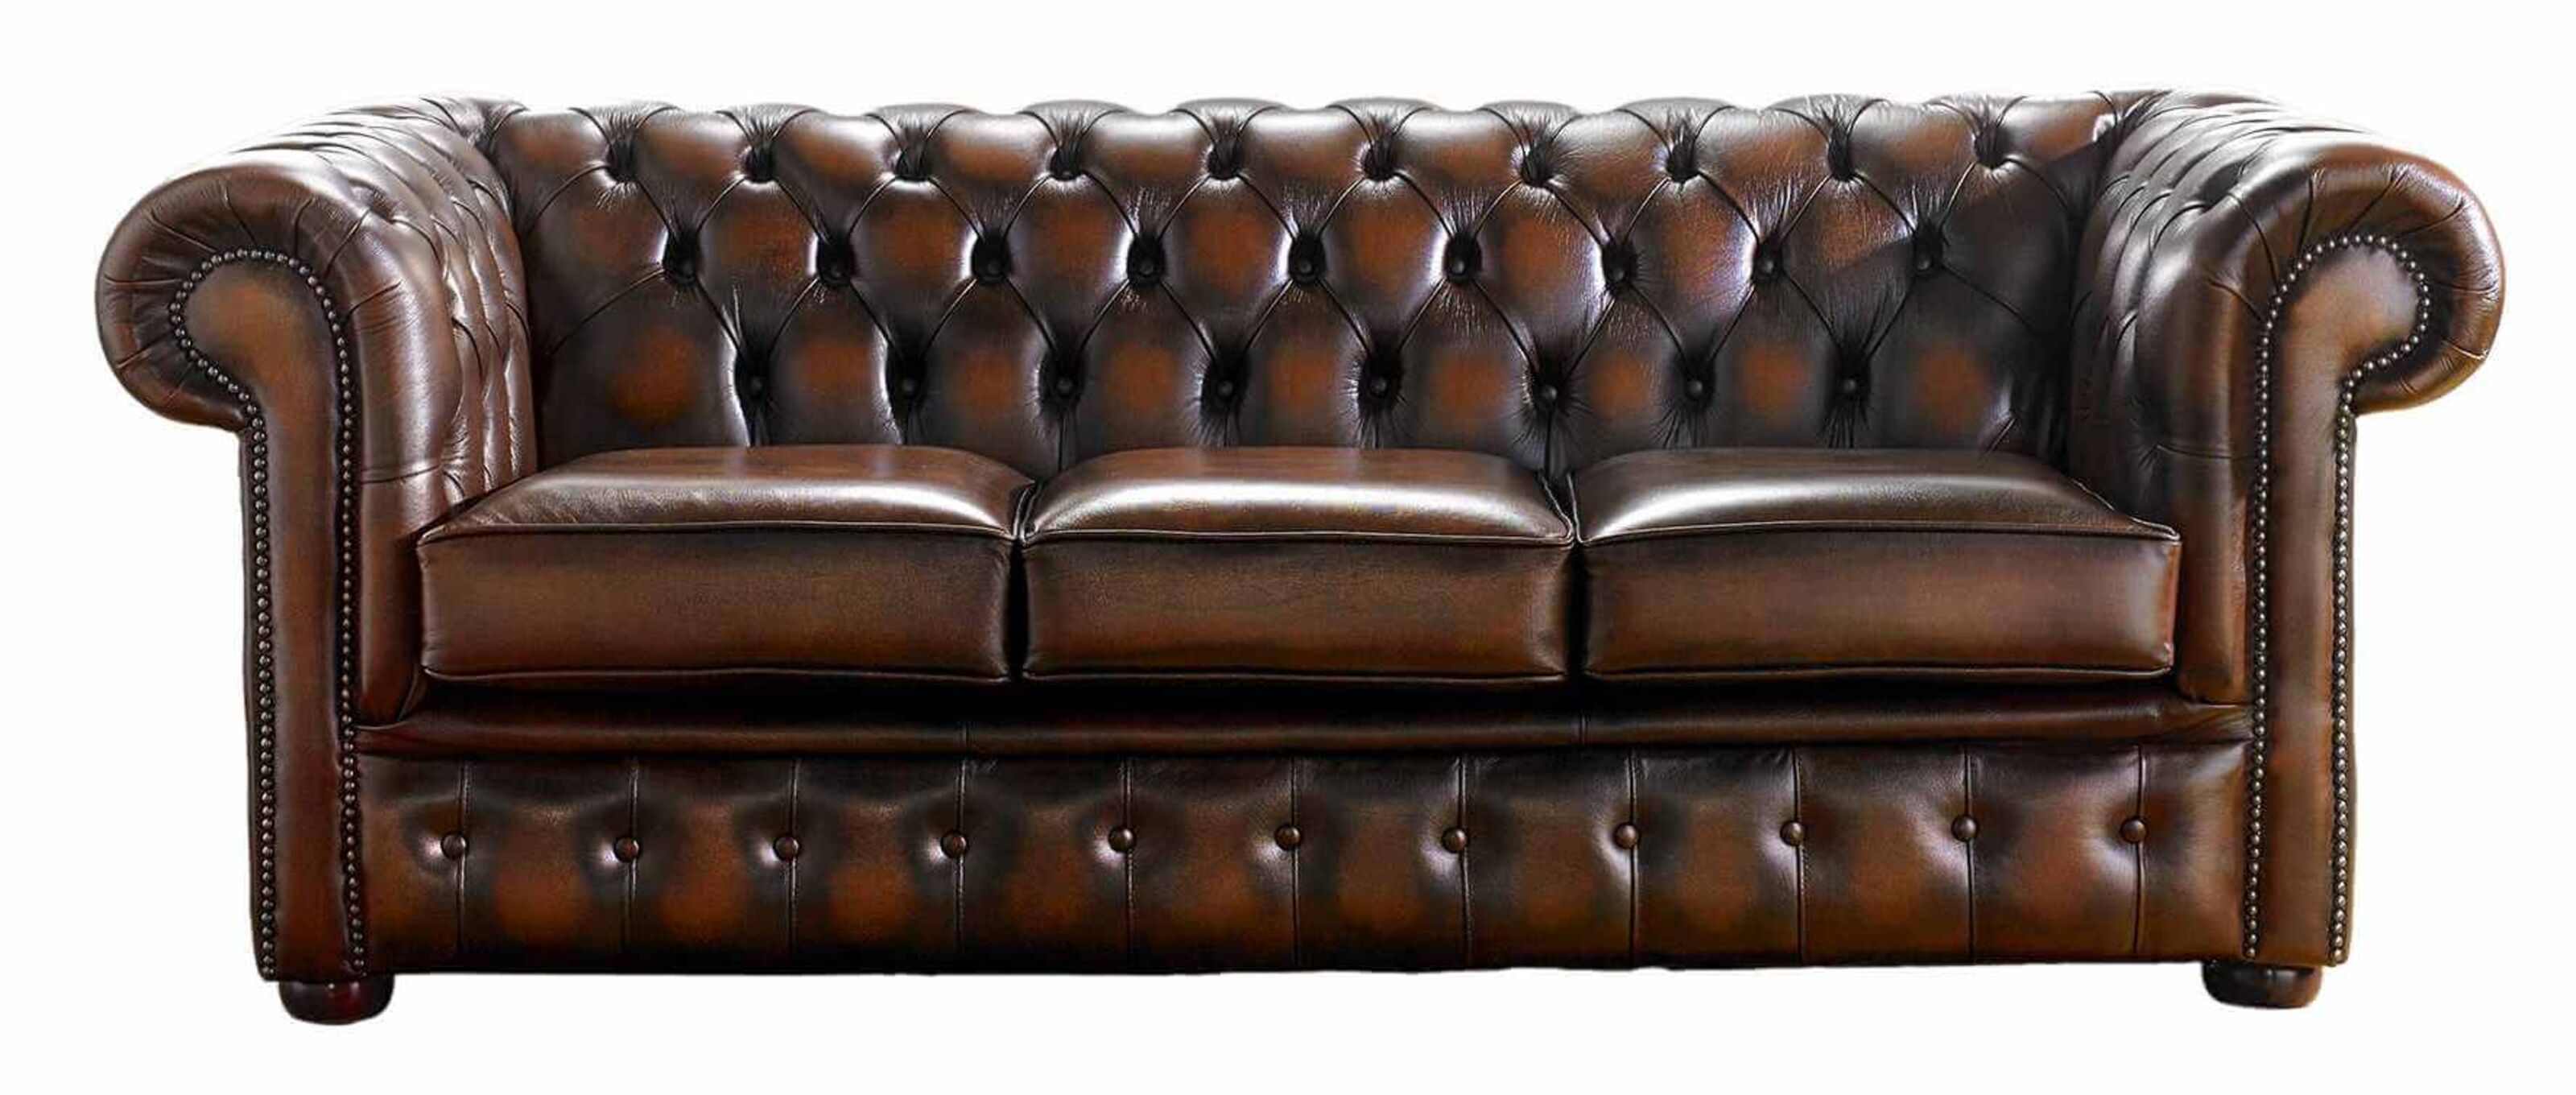 The Art of Authenticity Crafting Chesterfield Sofas in Their Birthplace  %Post Title